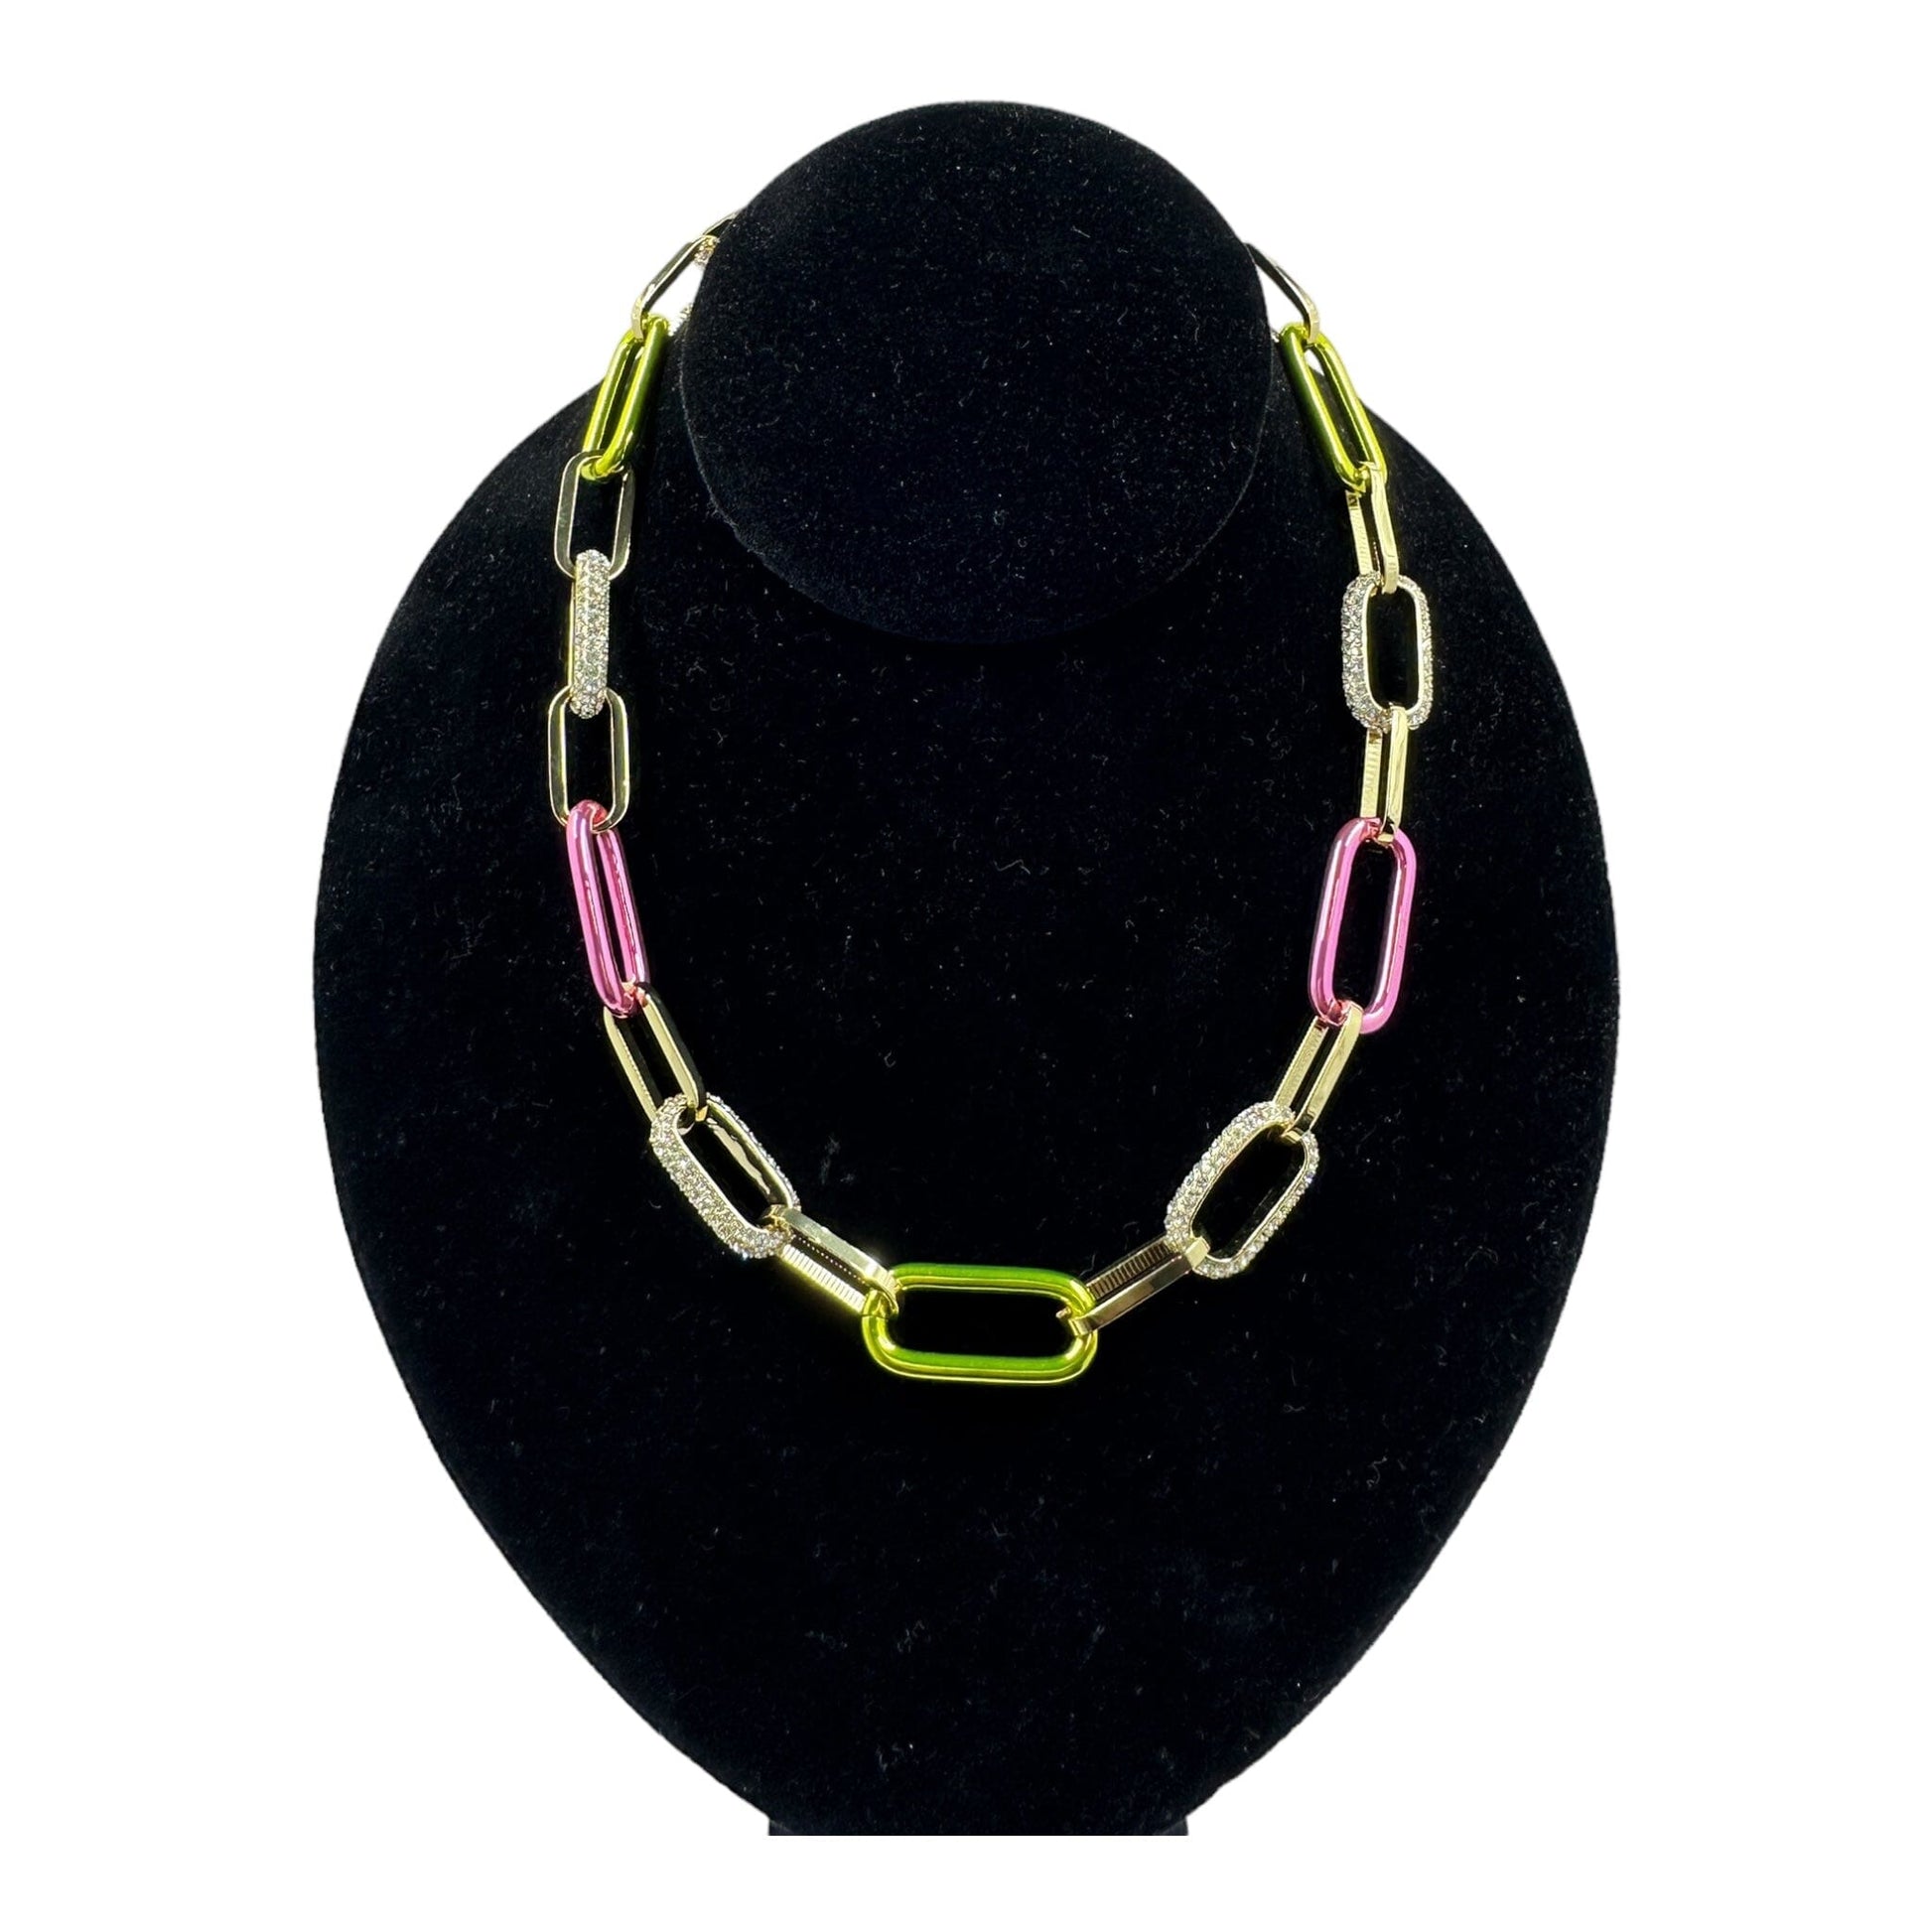 Delic Pink & Green Link Pave Chain Necklace Necklaces Trendzio 